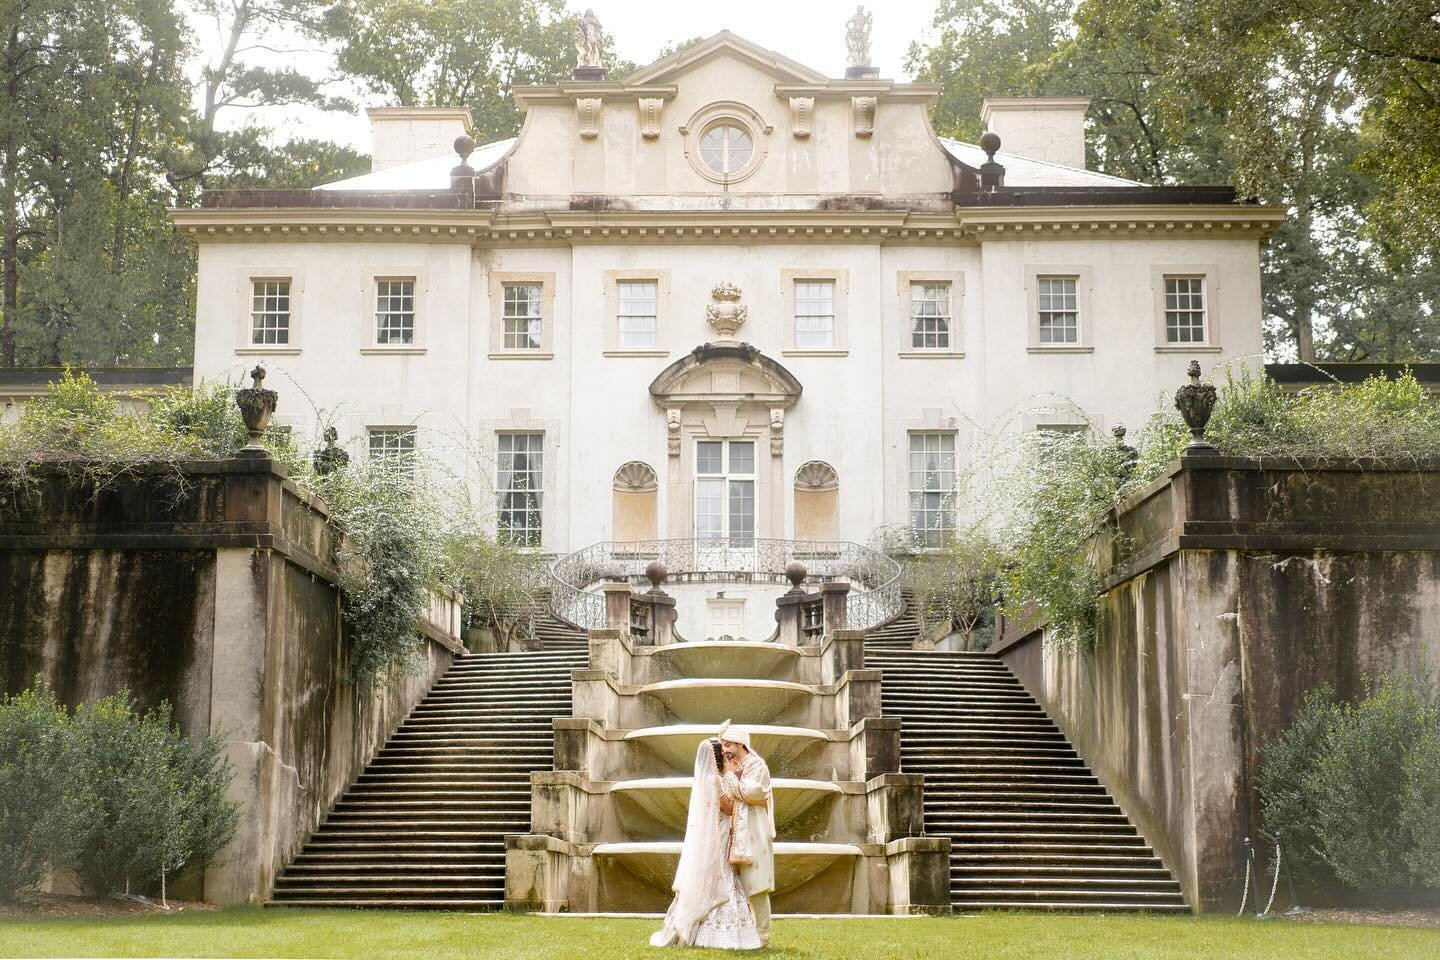 The Swan House at the Atlanta History Center will always be a favorite to shoot at. I mean just look at how dreamy it is 😍 

#southasainwedding #atlantawedding #atlantaweddingphotographer #southasianbride #swanhouse #atlantaweddingvenue